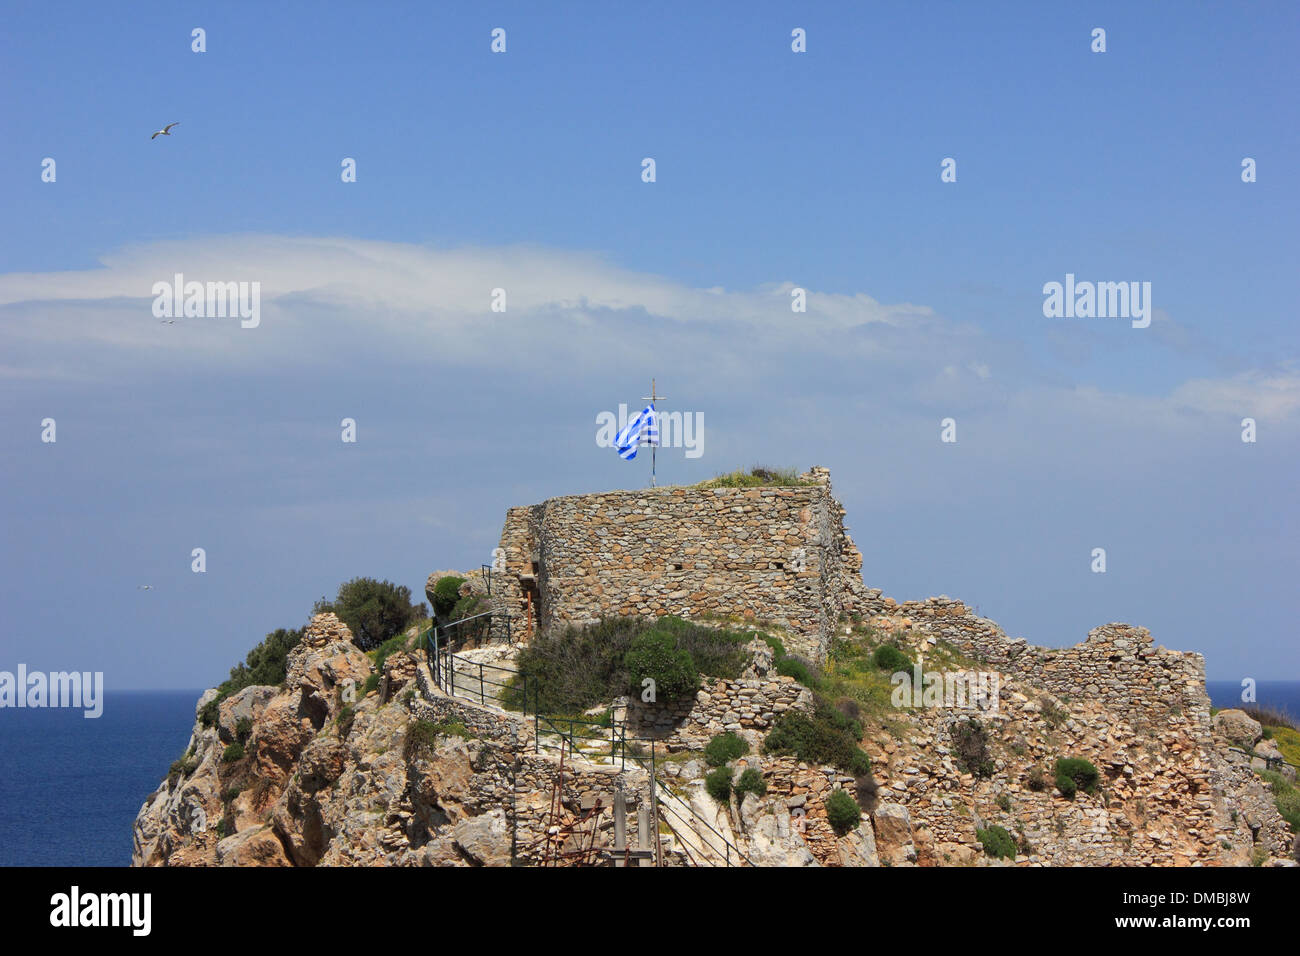 Castle with Greek flag Stock Photo